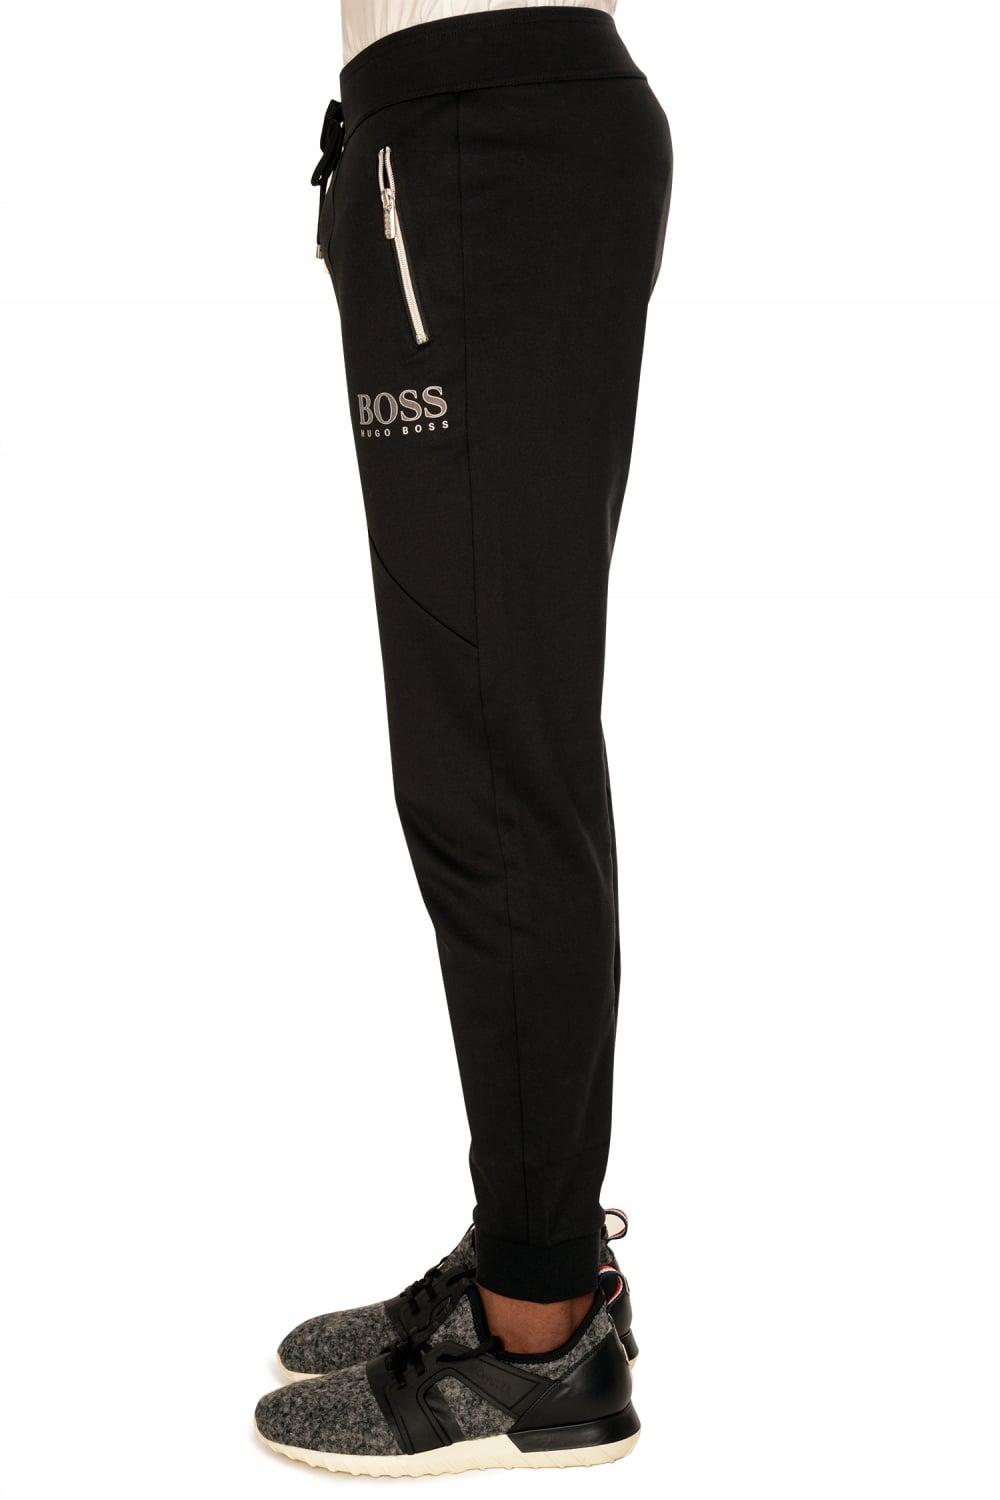 black and gold hugo boss joggers